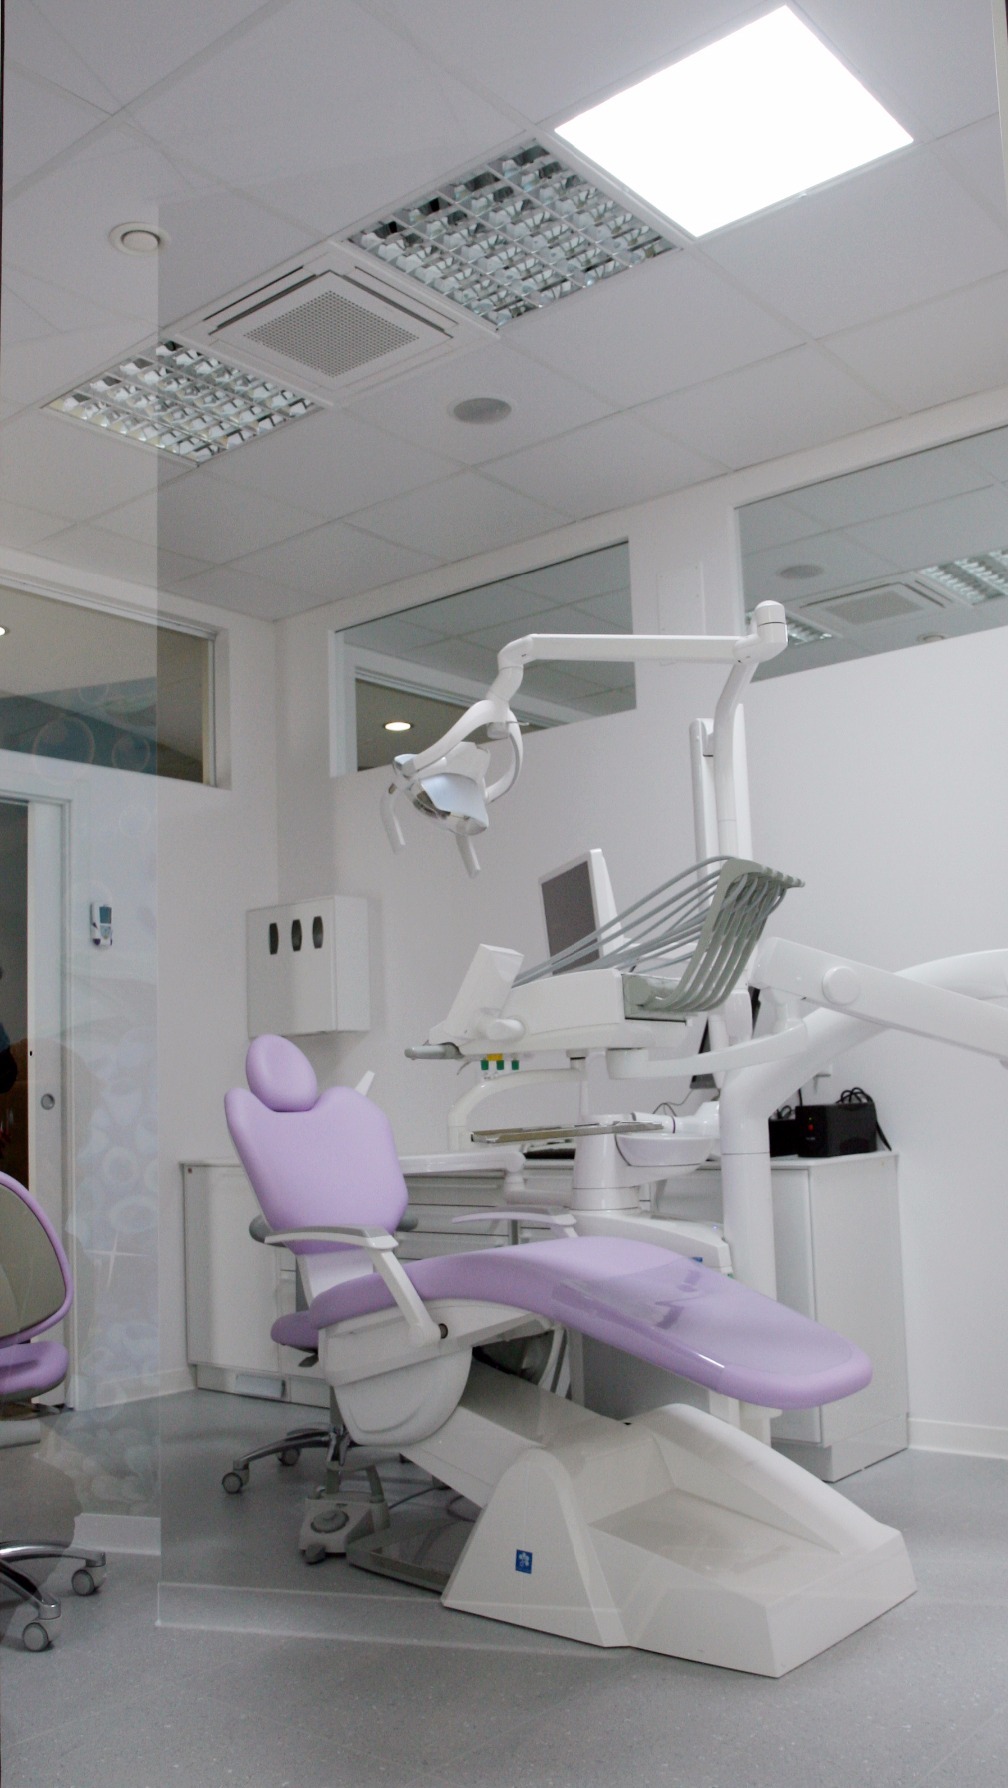 Dentist chair below square daylighting system diffuser